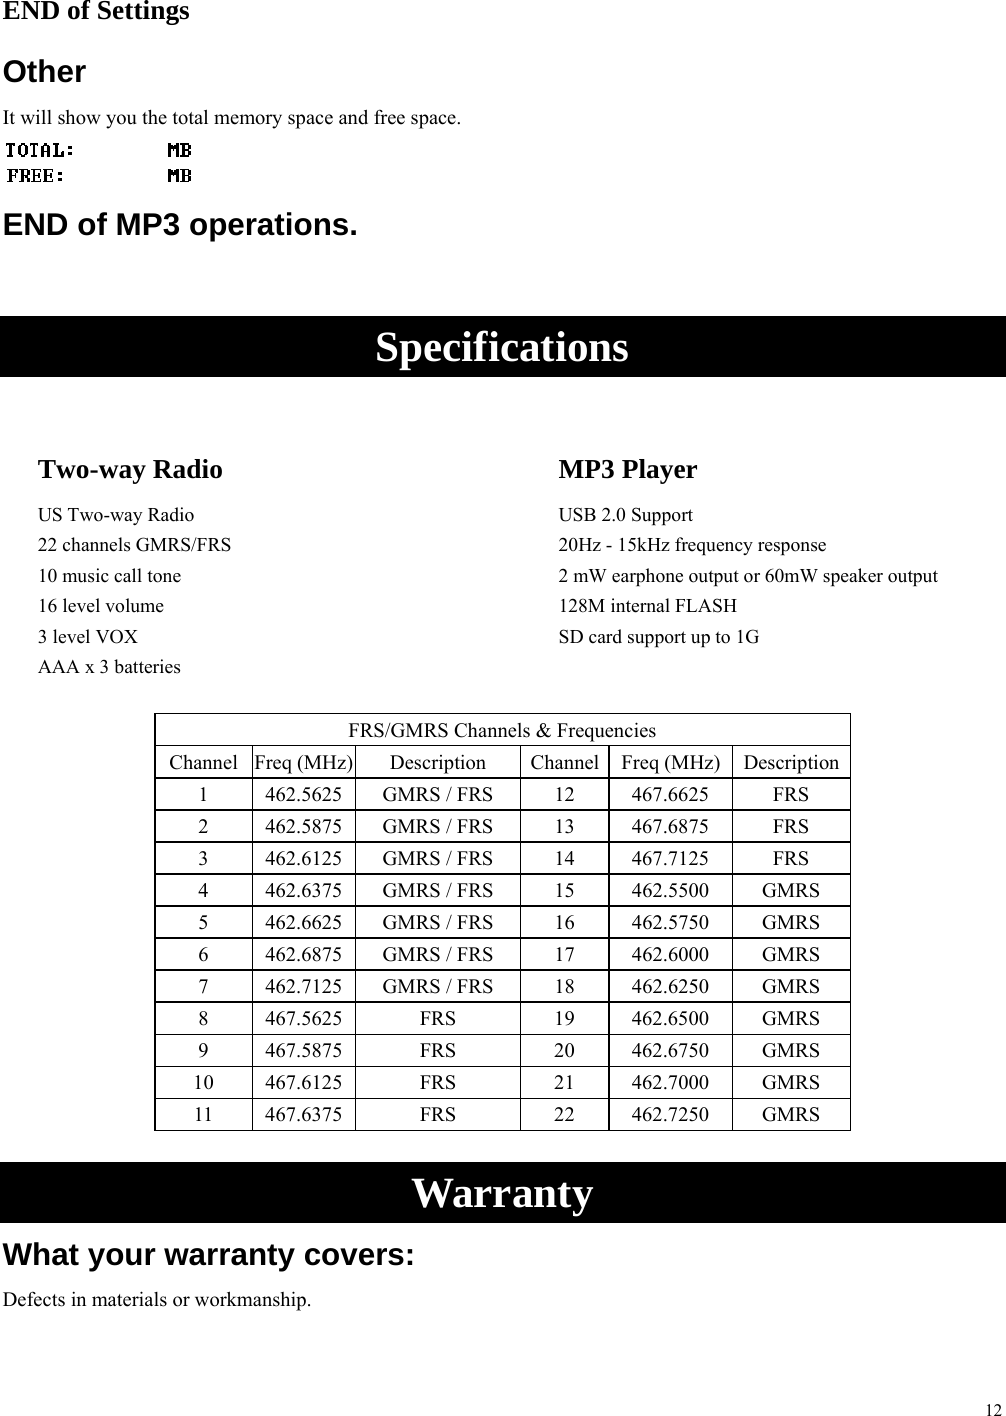 12 END of Settings Other It will show you the total memory space and free space.  END of MP3 operations.  Specifications  Two-way Radio US Two-way Radio 22 channels GMRS/FRS 10 music call tone 16 level volume 3 level VOX AAA x 3 batteries MP3 Player USB 2.0 Support 20Hz - 15kHz frequency response 2 mW earphone output or 60mW speaker output 128M internal FLASH SD card support up to 1G  FRS/GMRS Channels &amp; Frequencies Channel Freq (MHz)  Description  Channel Freq (MHz)  Description 1 462.5625 GMRS / FRS  12 467.6625  FRS 2 462.5875 GMRS / FRS  13 467.6875  FRS 3 462.6125 GMRS / FRS  14 467.7125  FRS 4 462.6375 GMRS / FRS  15 462.5500 GMRS 5 462.6625 GMRS / FRS  16 462.5750 GMRS 6 462.6875 GMRS / FRS  17 462.6000 GMRS 7 462.7125 GMRS / FRS  18 462.6250 GMRS 8 467.5625  FRS  19 462.6500 GMRS 9 467.5875  FRS  20 462.6750 GMRS 10 467.6125  FRS  21  462.7000 GMRS 11 467.6375  FRS  22  462.7250 GMRS  Warranty What your warranty covers: Defects in materials or workmanship. 